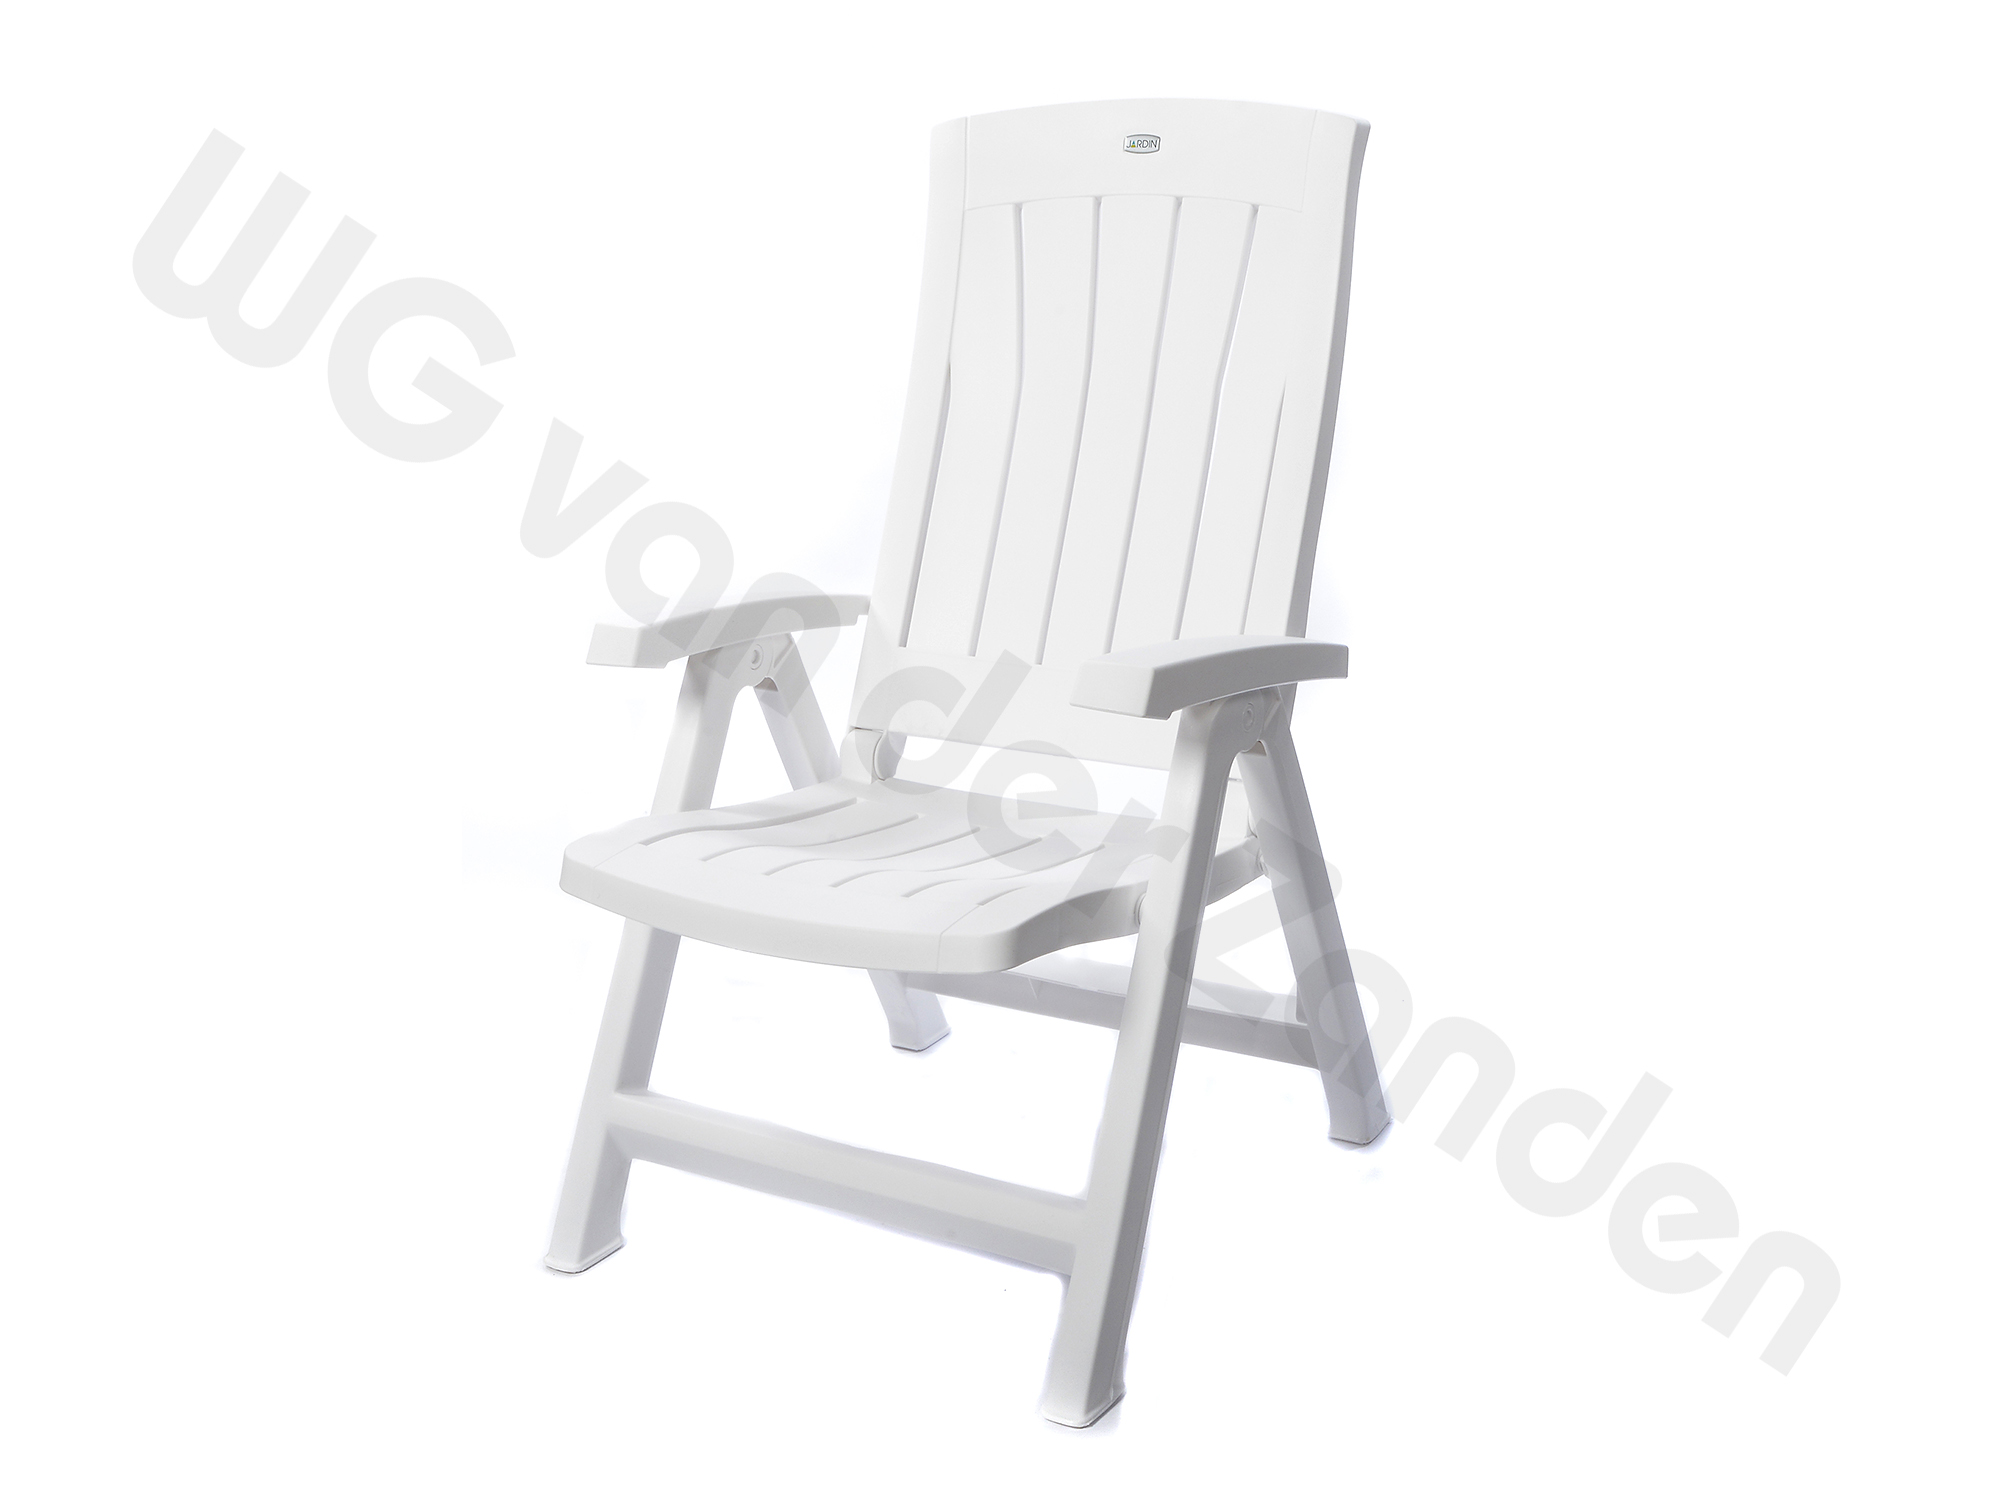 770066 CHAIR OUTDOOR  PLASTIC GREY MULTI-POSITION